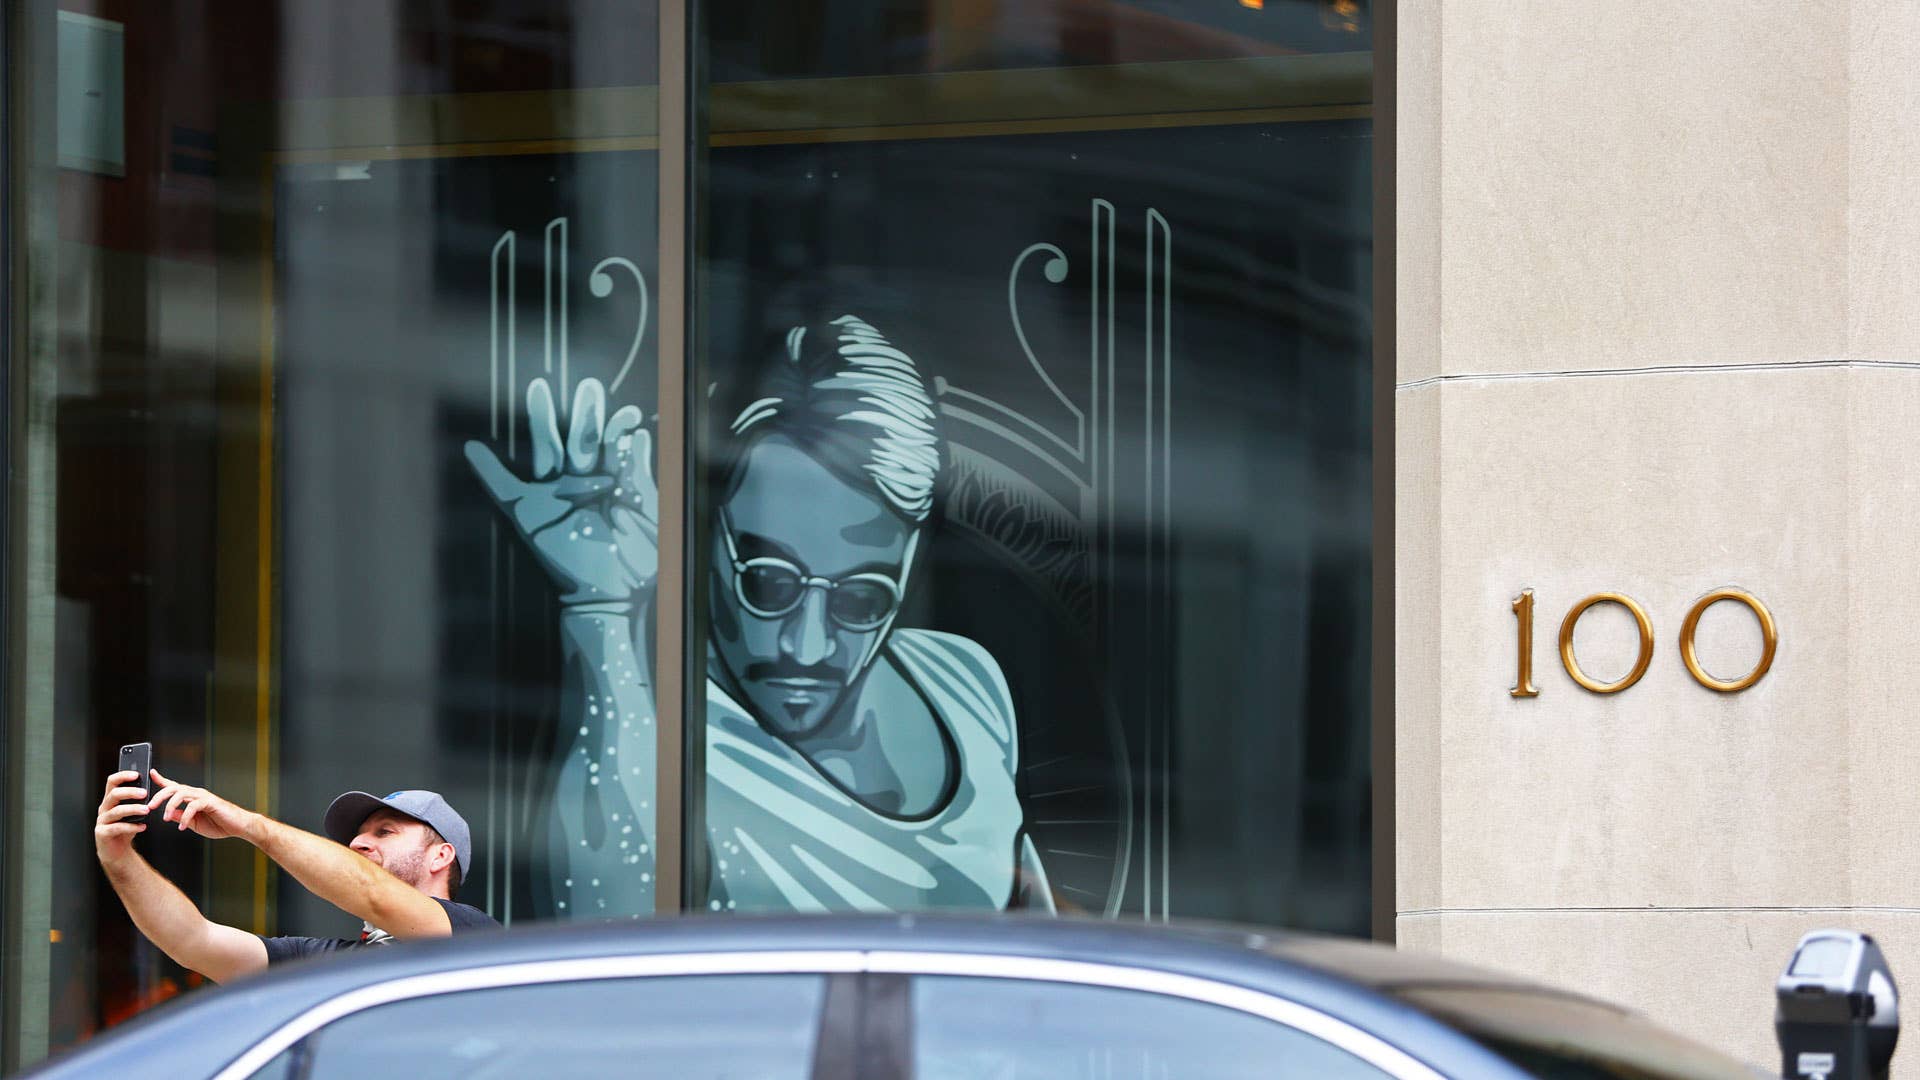 An unidentified man parks and takes a selfie next to the restaurant Nusr-Et.